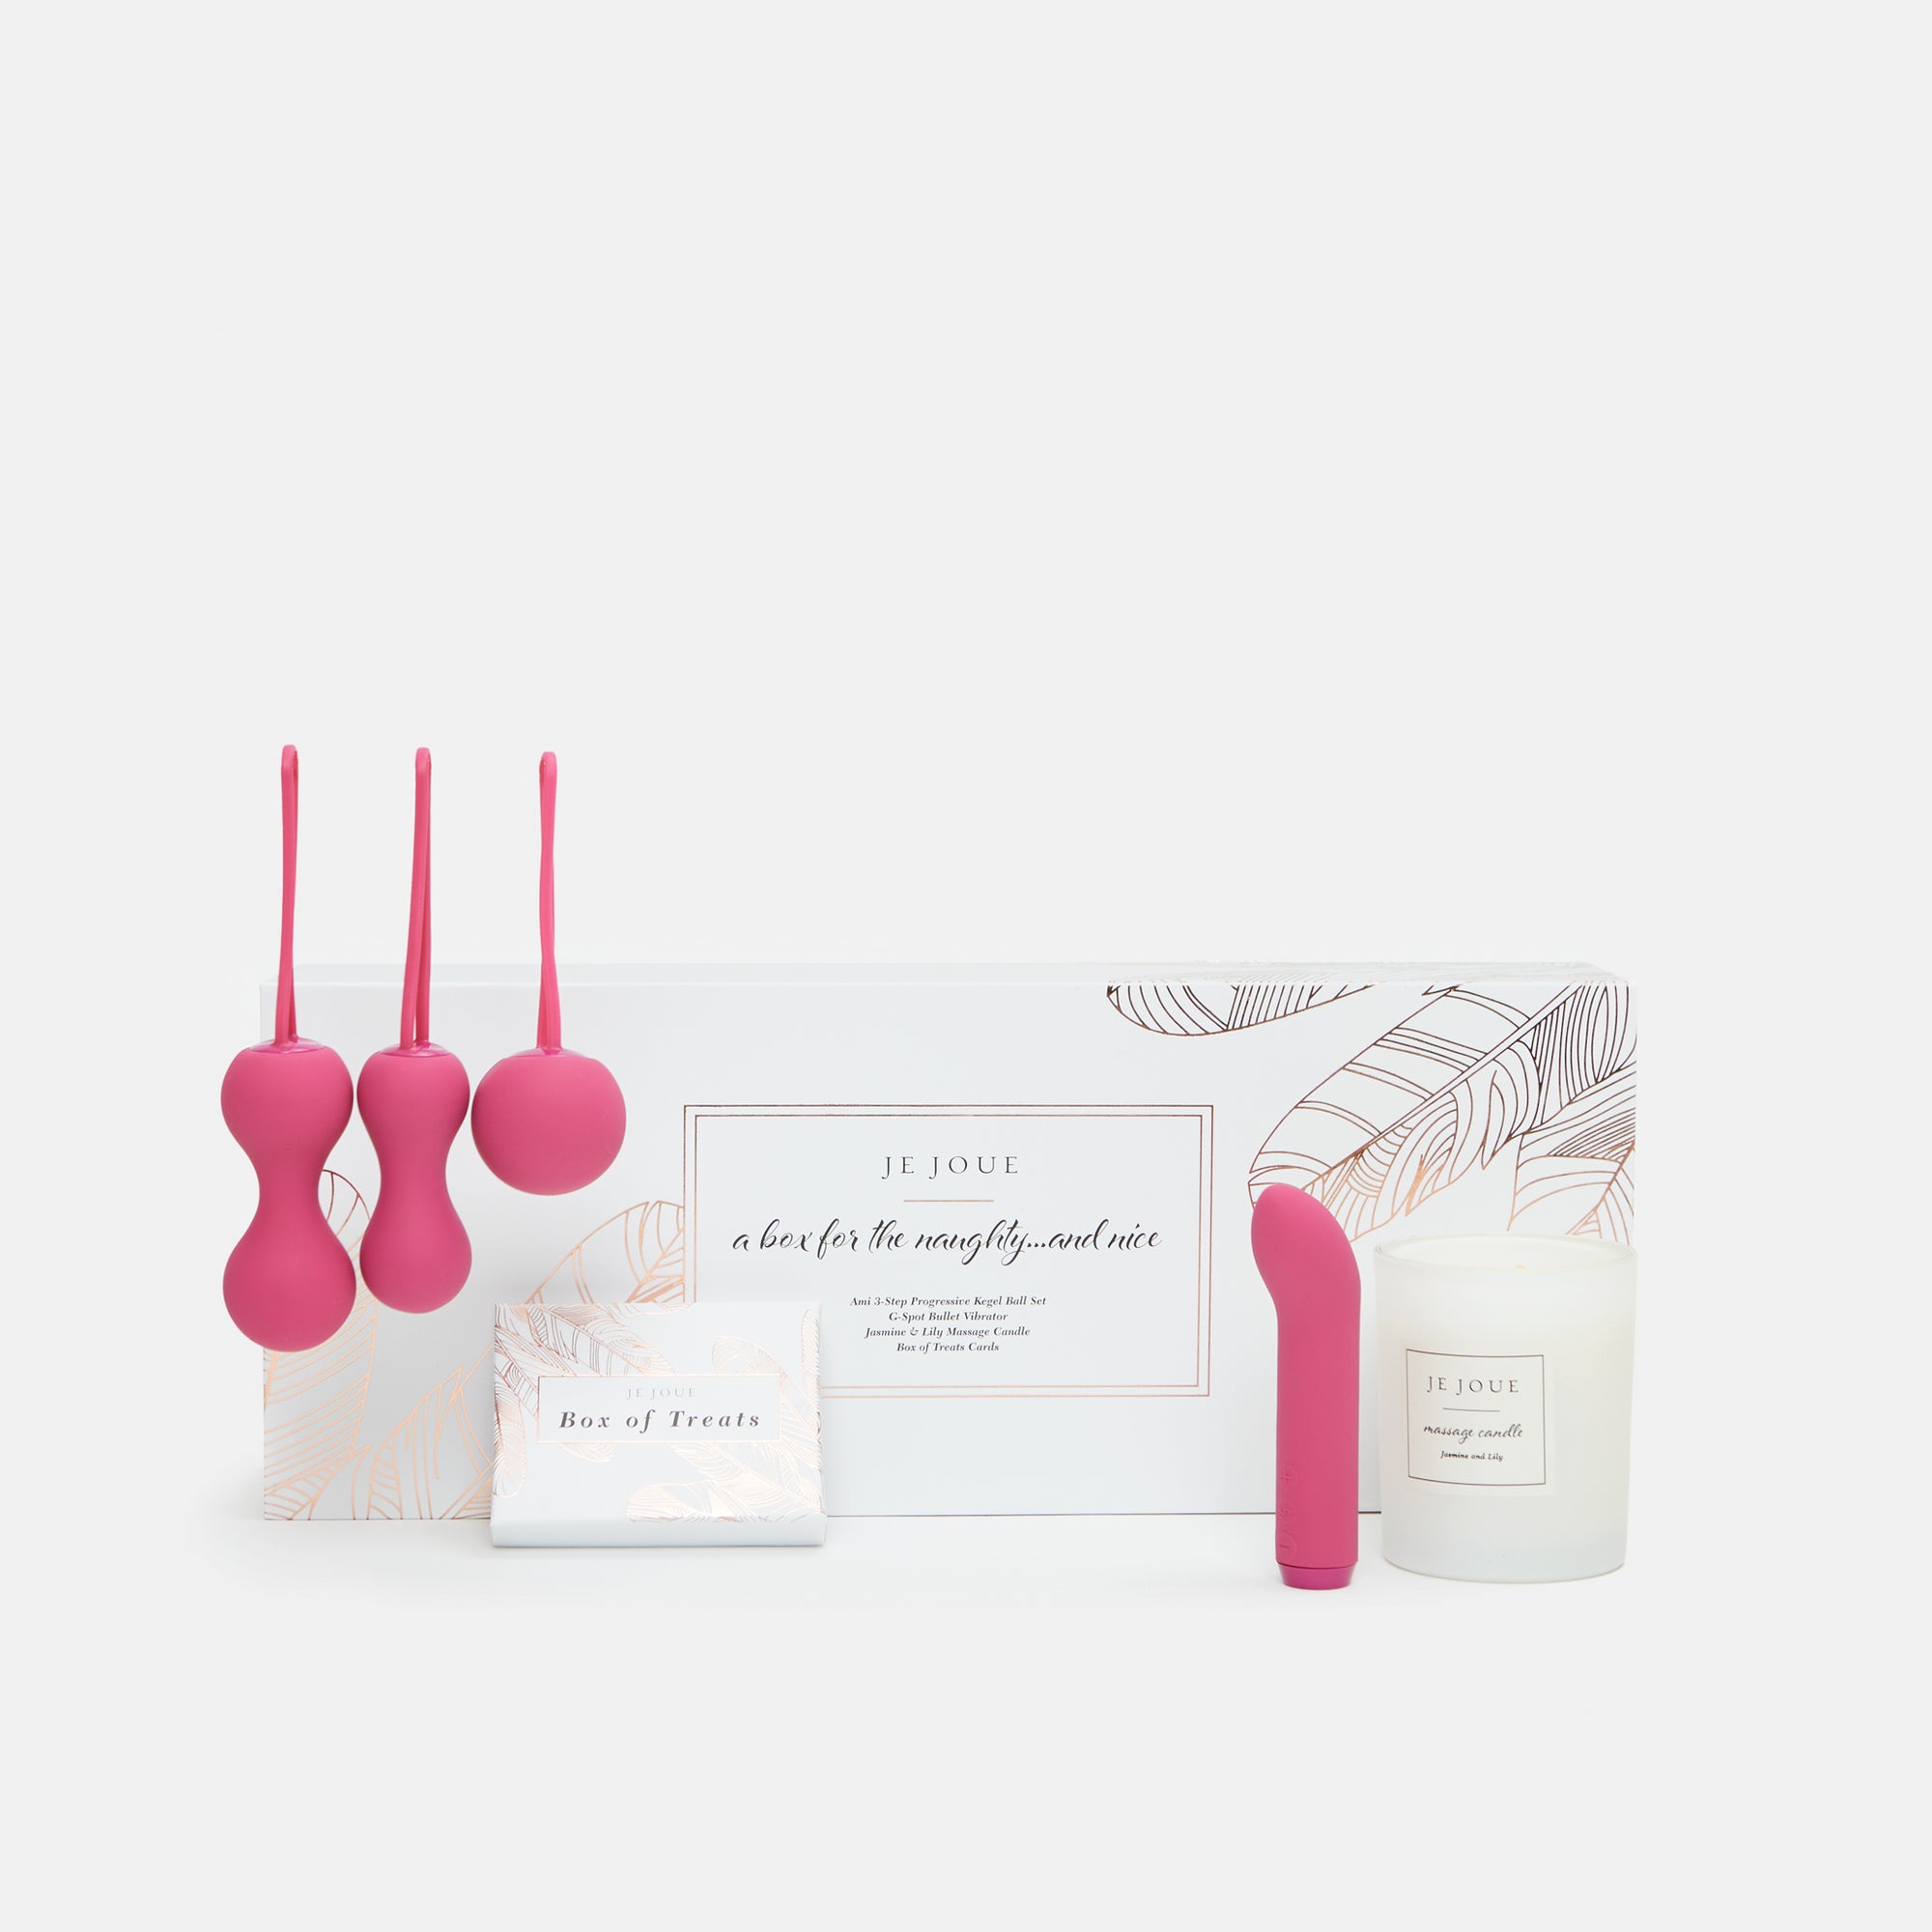 The Nice & Naughty Gift Set by Je Joue